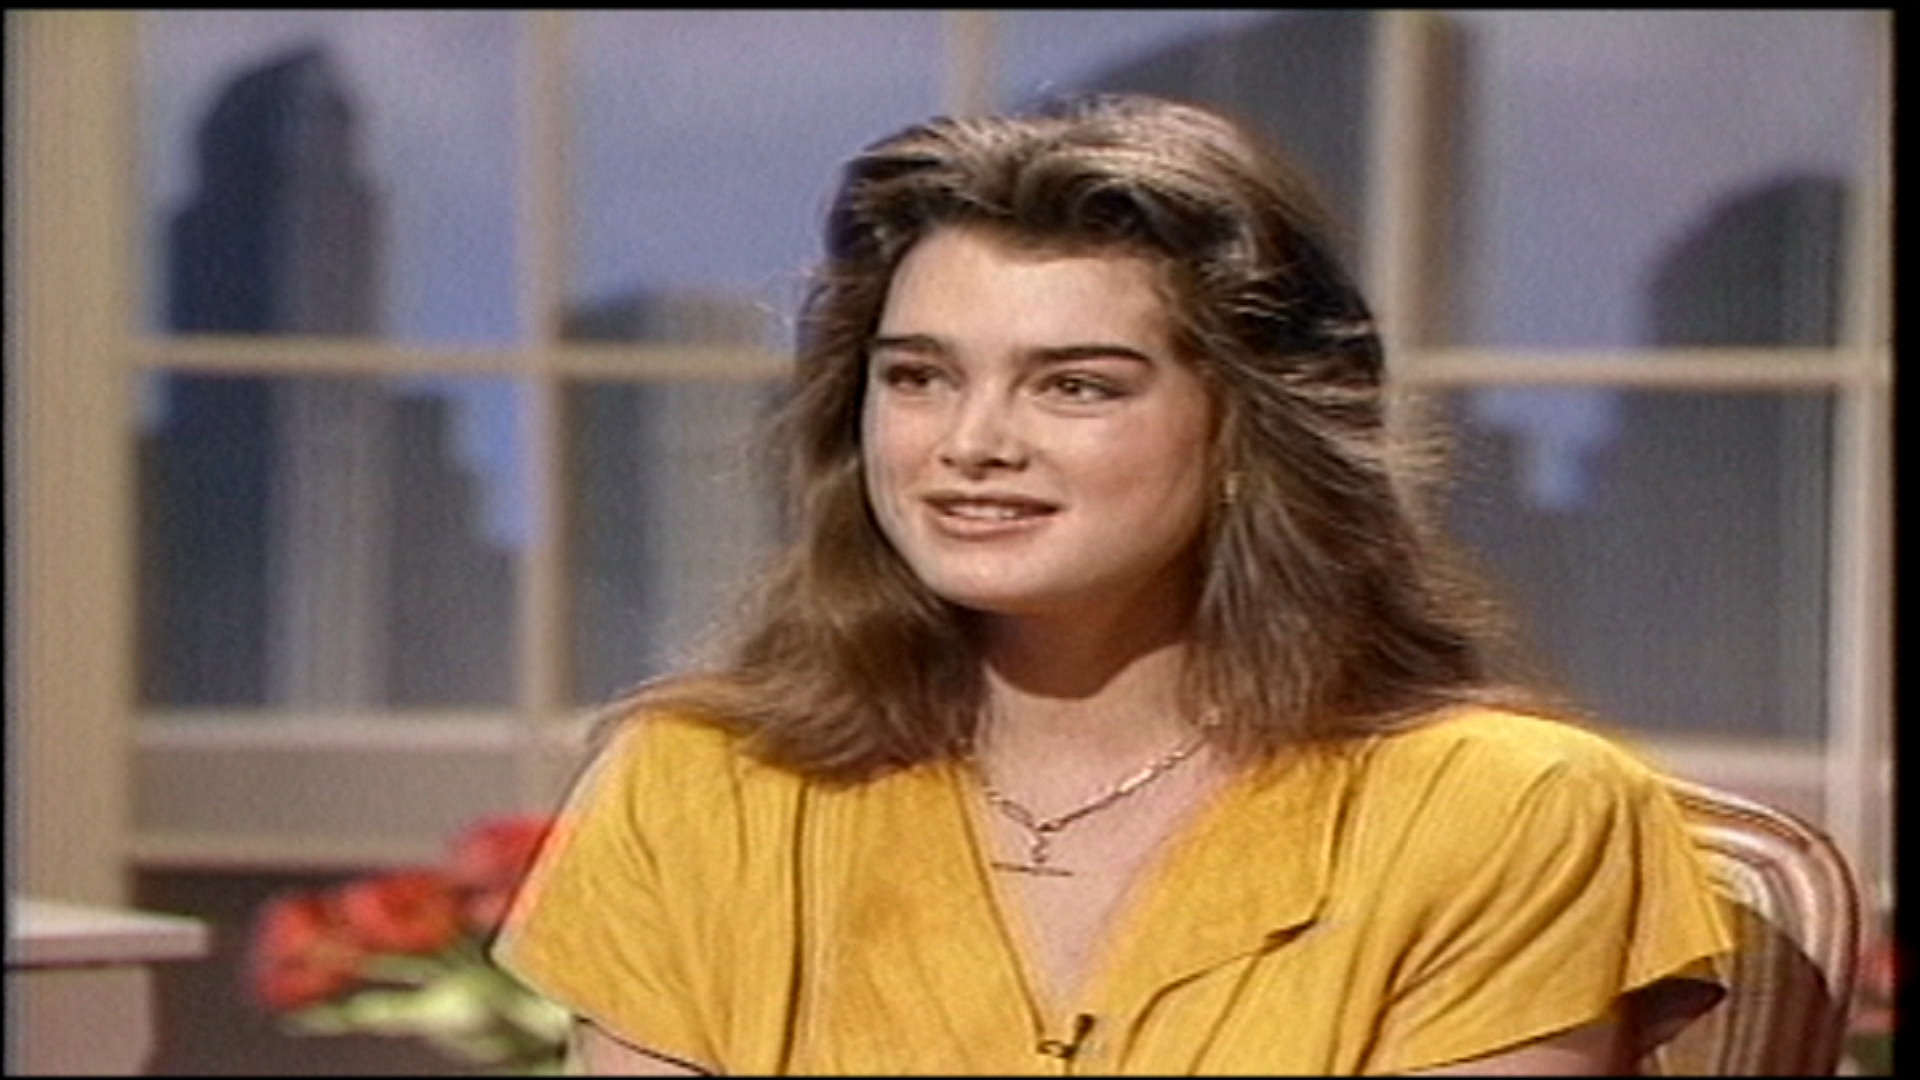 Flashback See Brooke Shields 70s and 80s interviews on TODAY